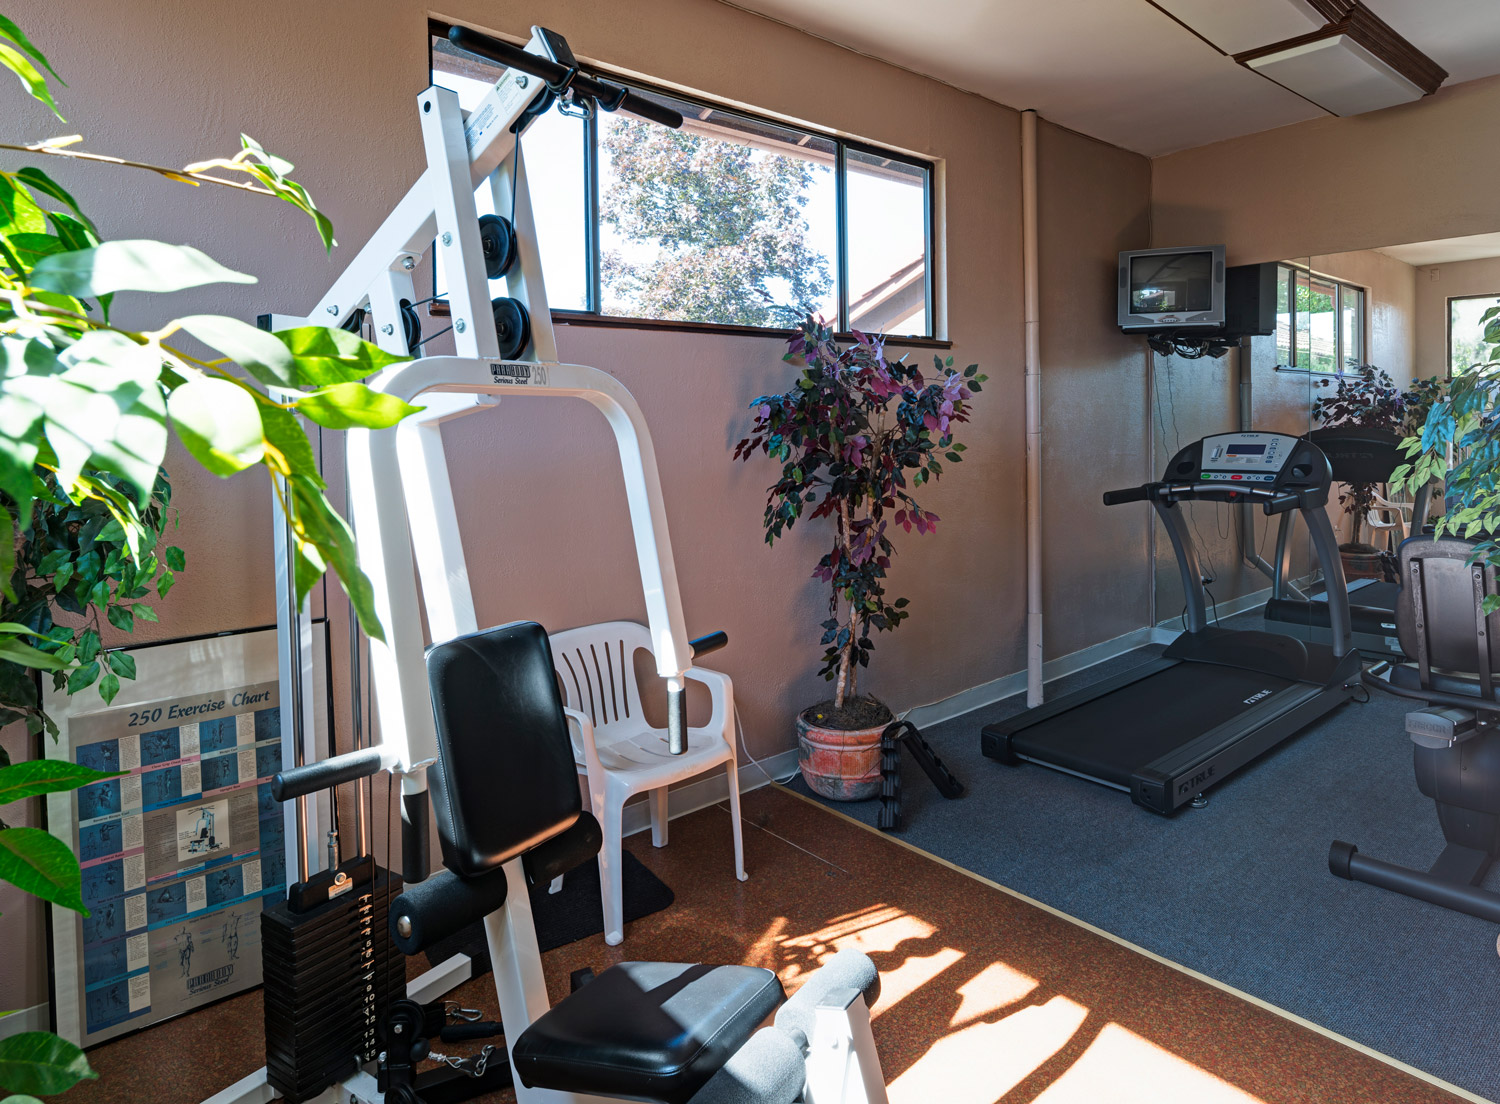 Fitness center with weight machine, treadmill and stationary bike. Small TV mounted to wall.